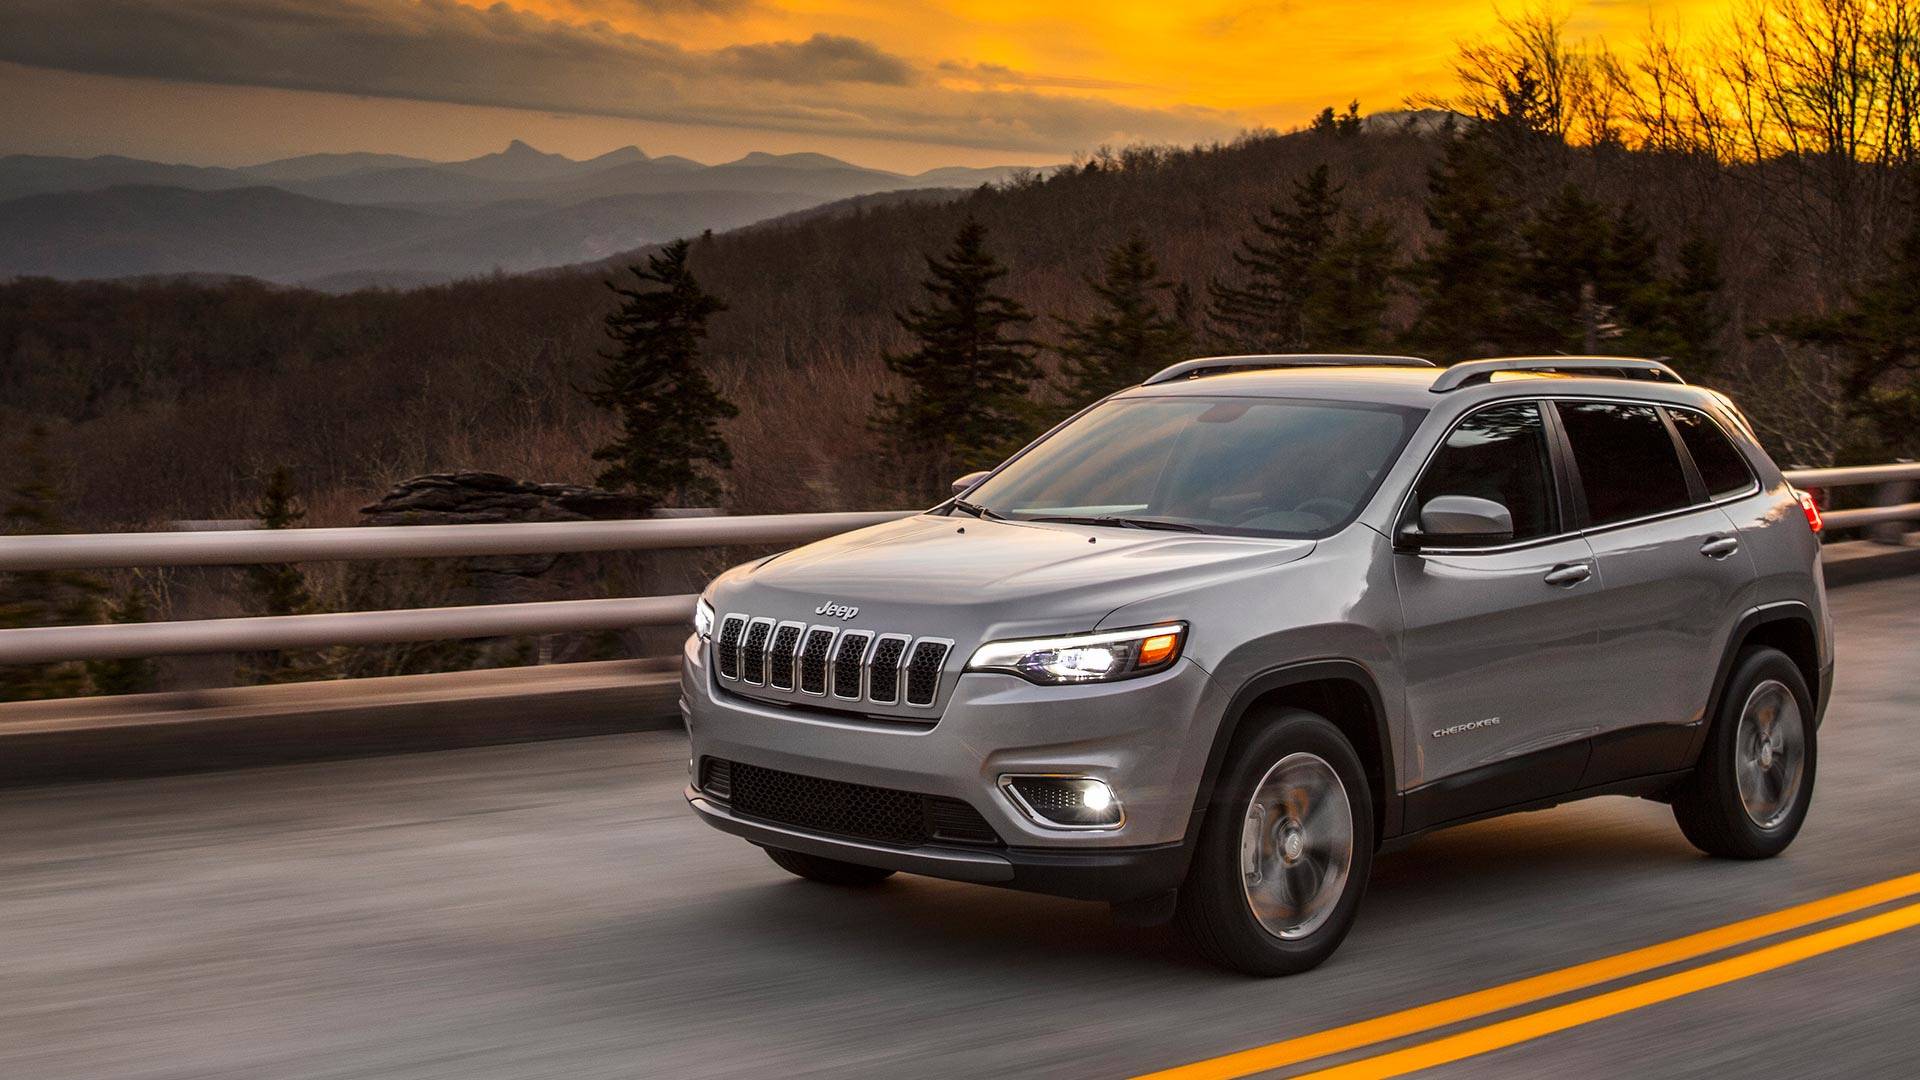 2019 Jeep Cherokee First Drive: All-Around Upgrade